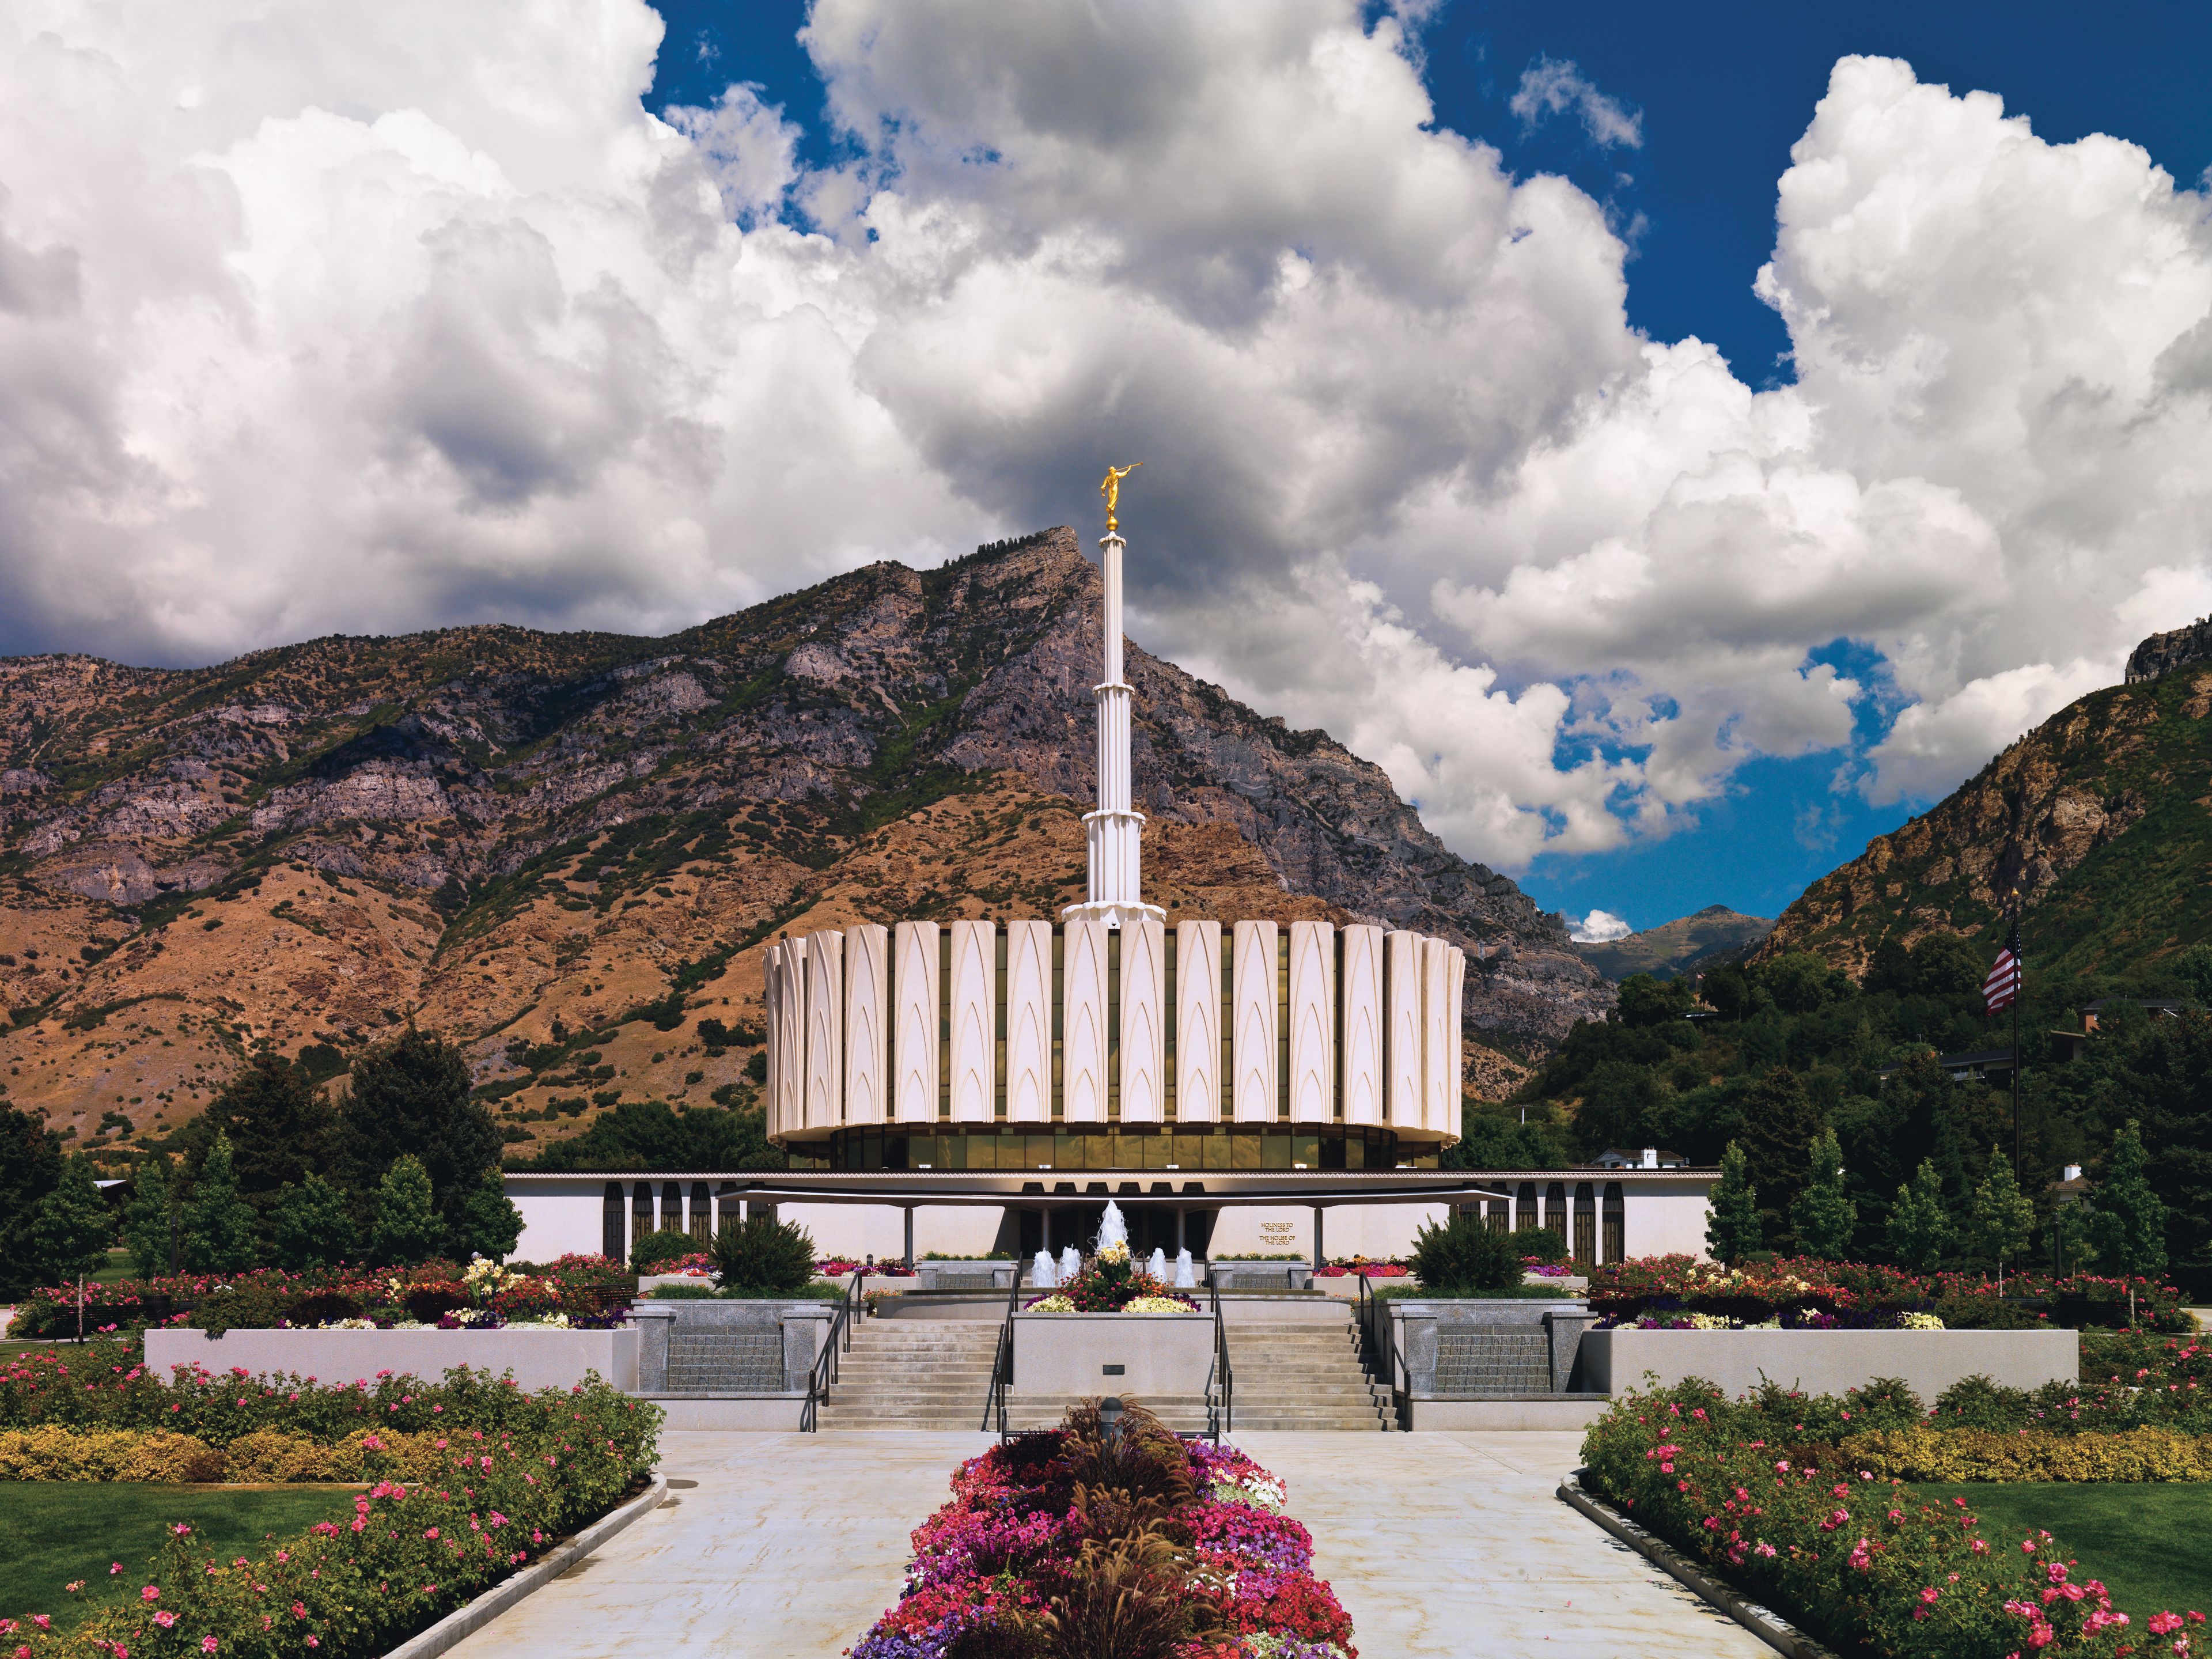 The front of the Provo Utah Temple on a partly cloudy day.